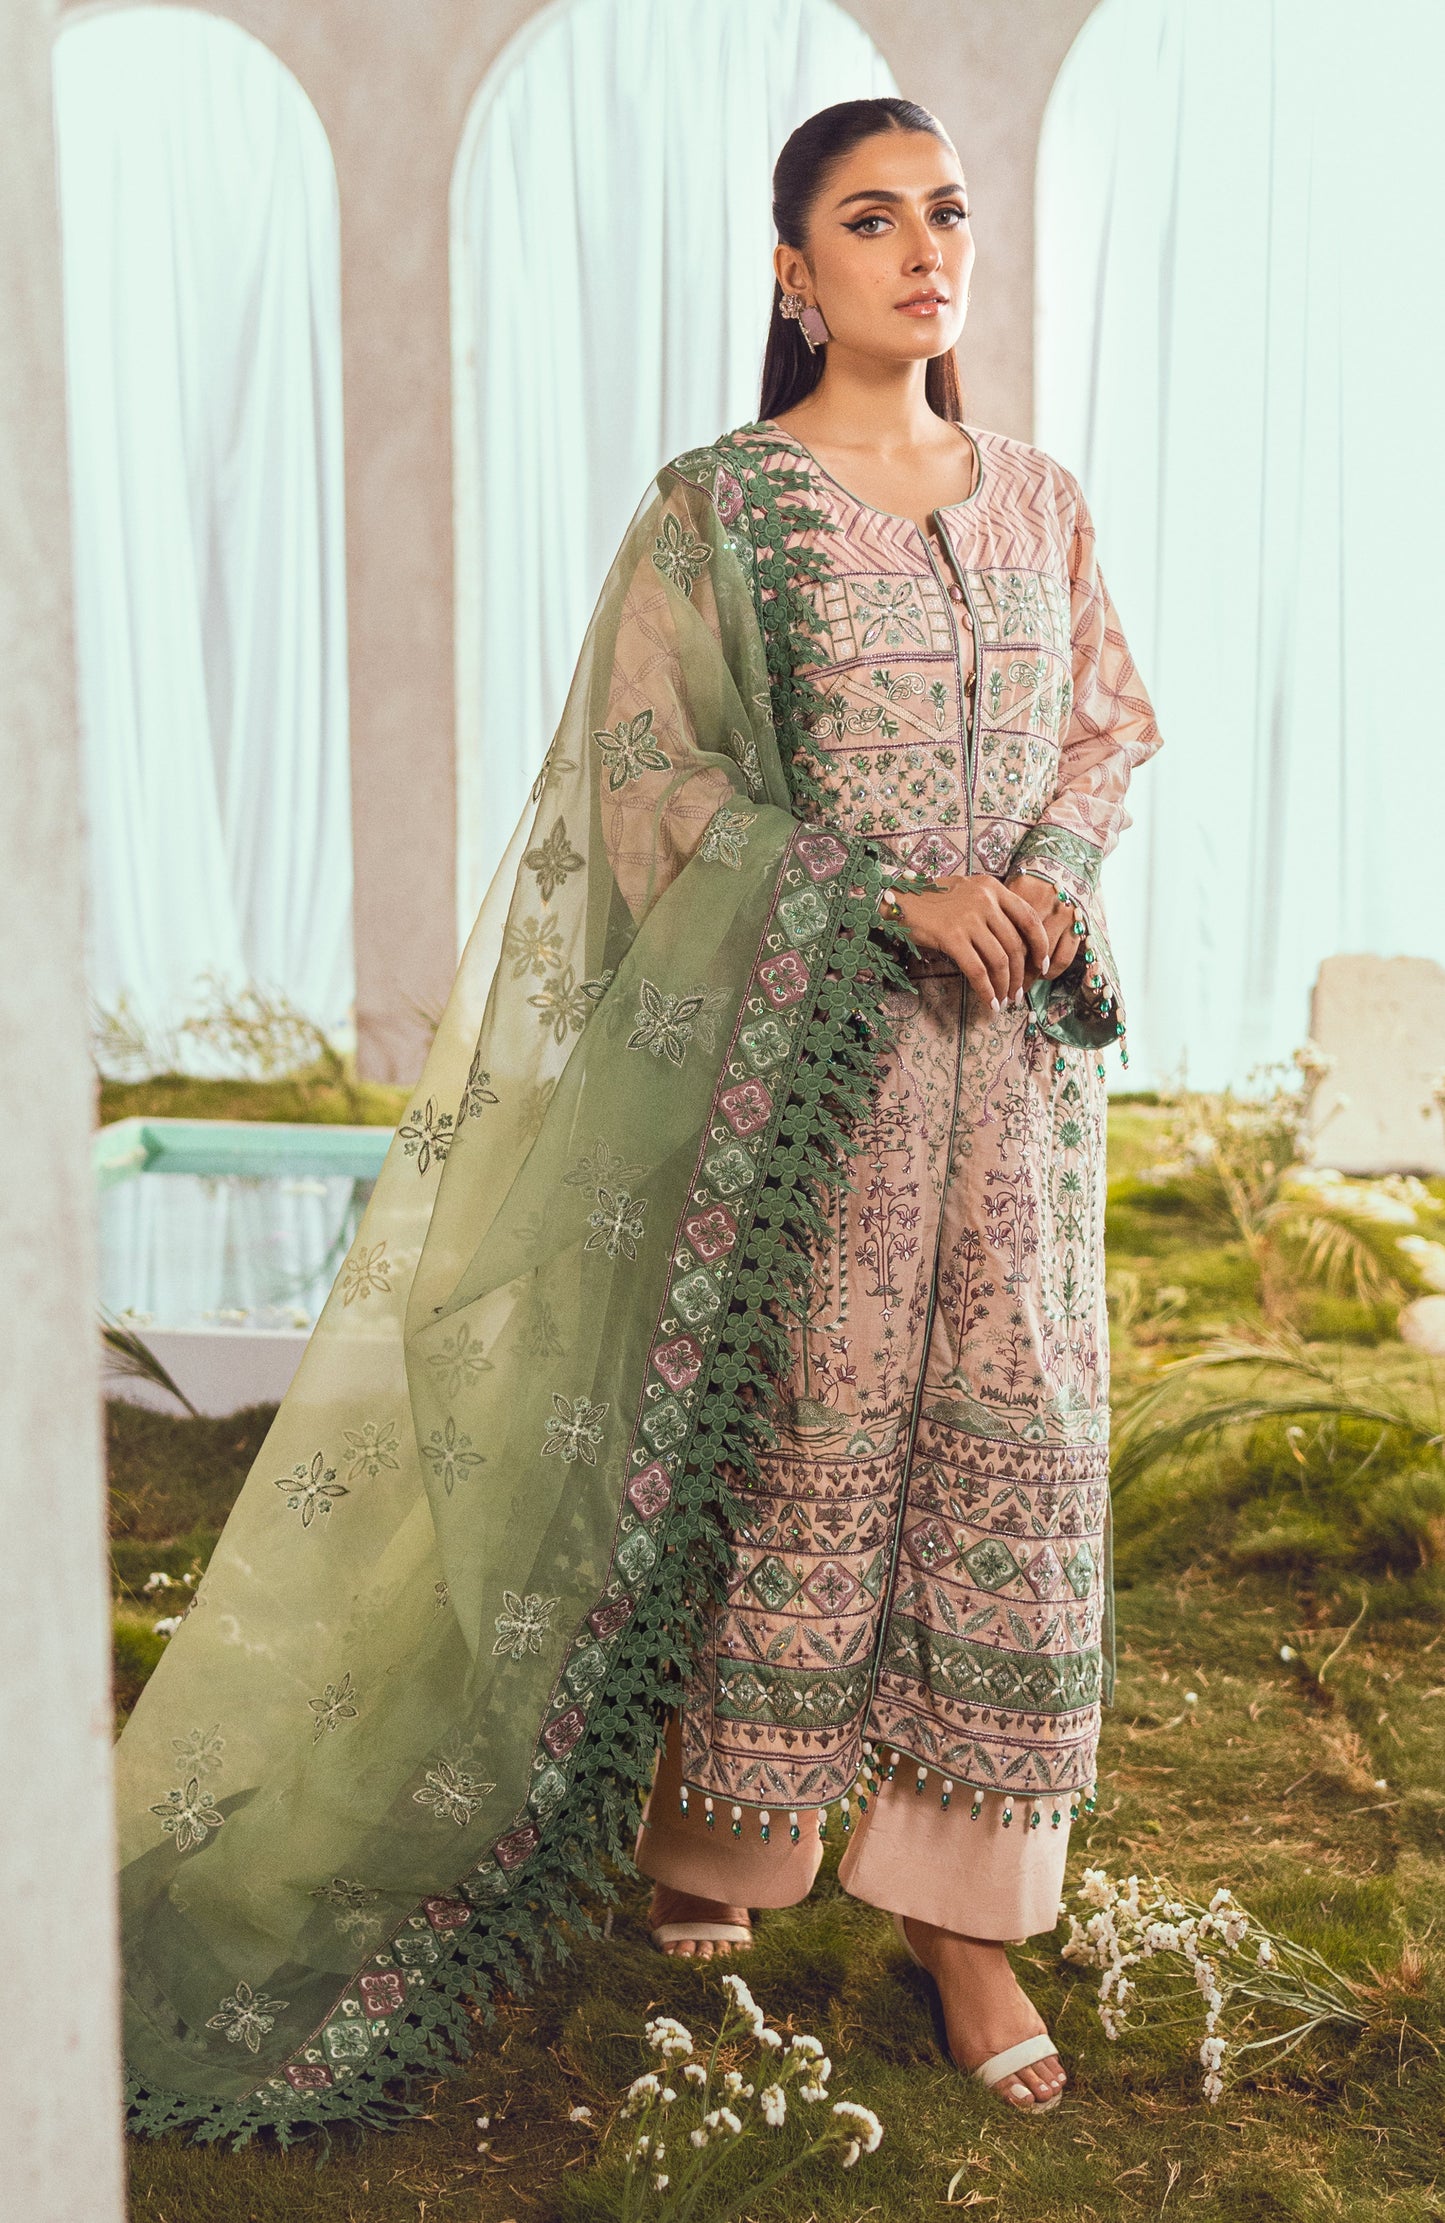 Buy Now, D#06 MAHIYMAAN - Eid Luxury Embroidered Lawn - Al Zohaib - Shahana Collection UK - Wedding and Bridal Party Dresses - Festive Eid 2023